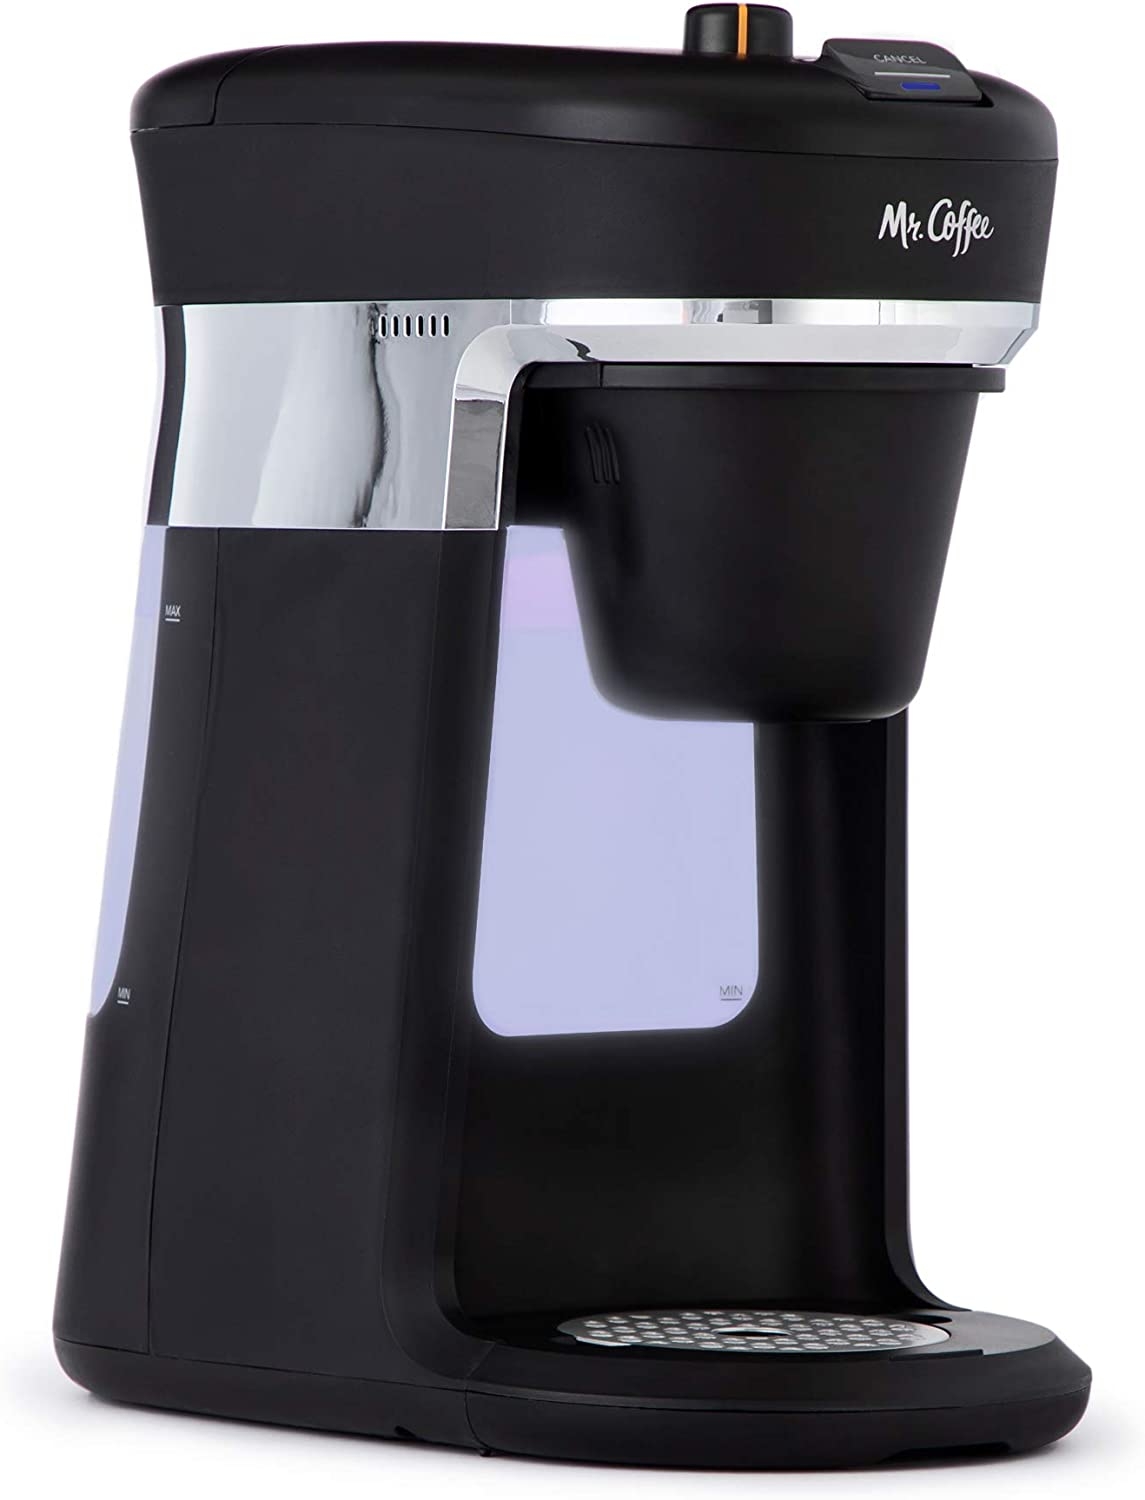 Mr. Coffee HotCup Single Serve/Pod Free Coffee Maker Import To Shop ×Product customization General Description Gallery Reviews